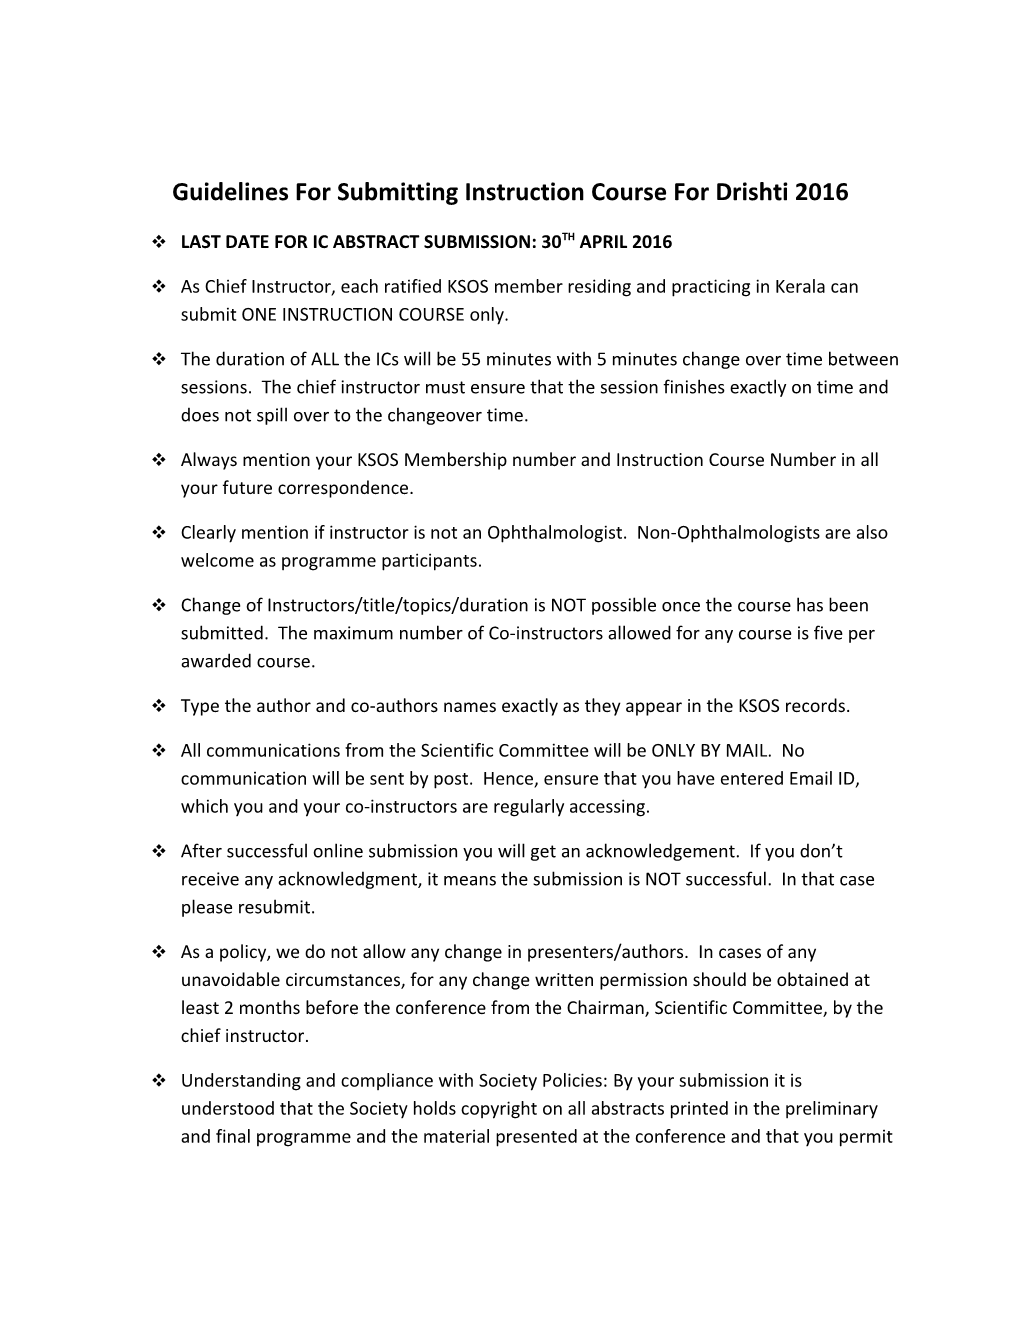 Guidelines for Submitting Instruction Course for Drishti 2016